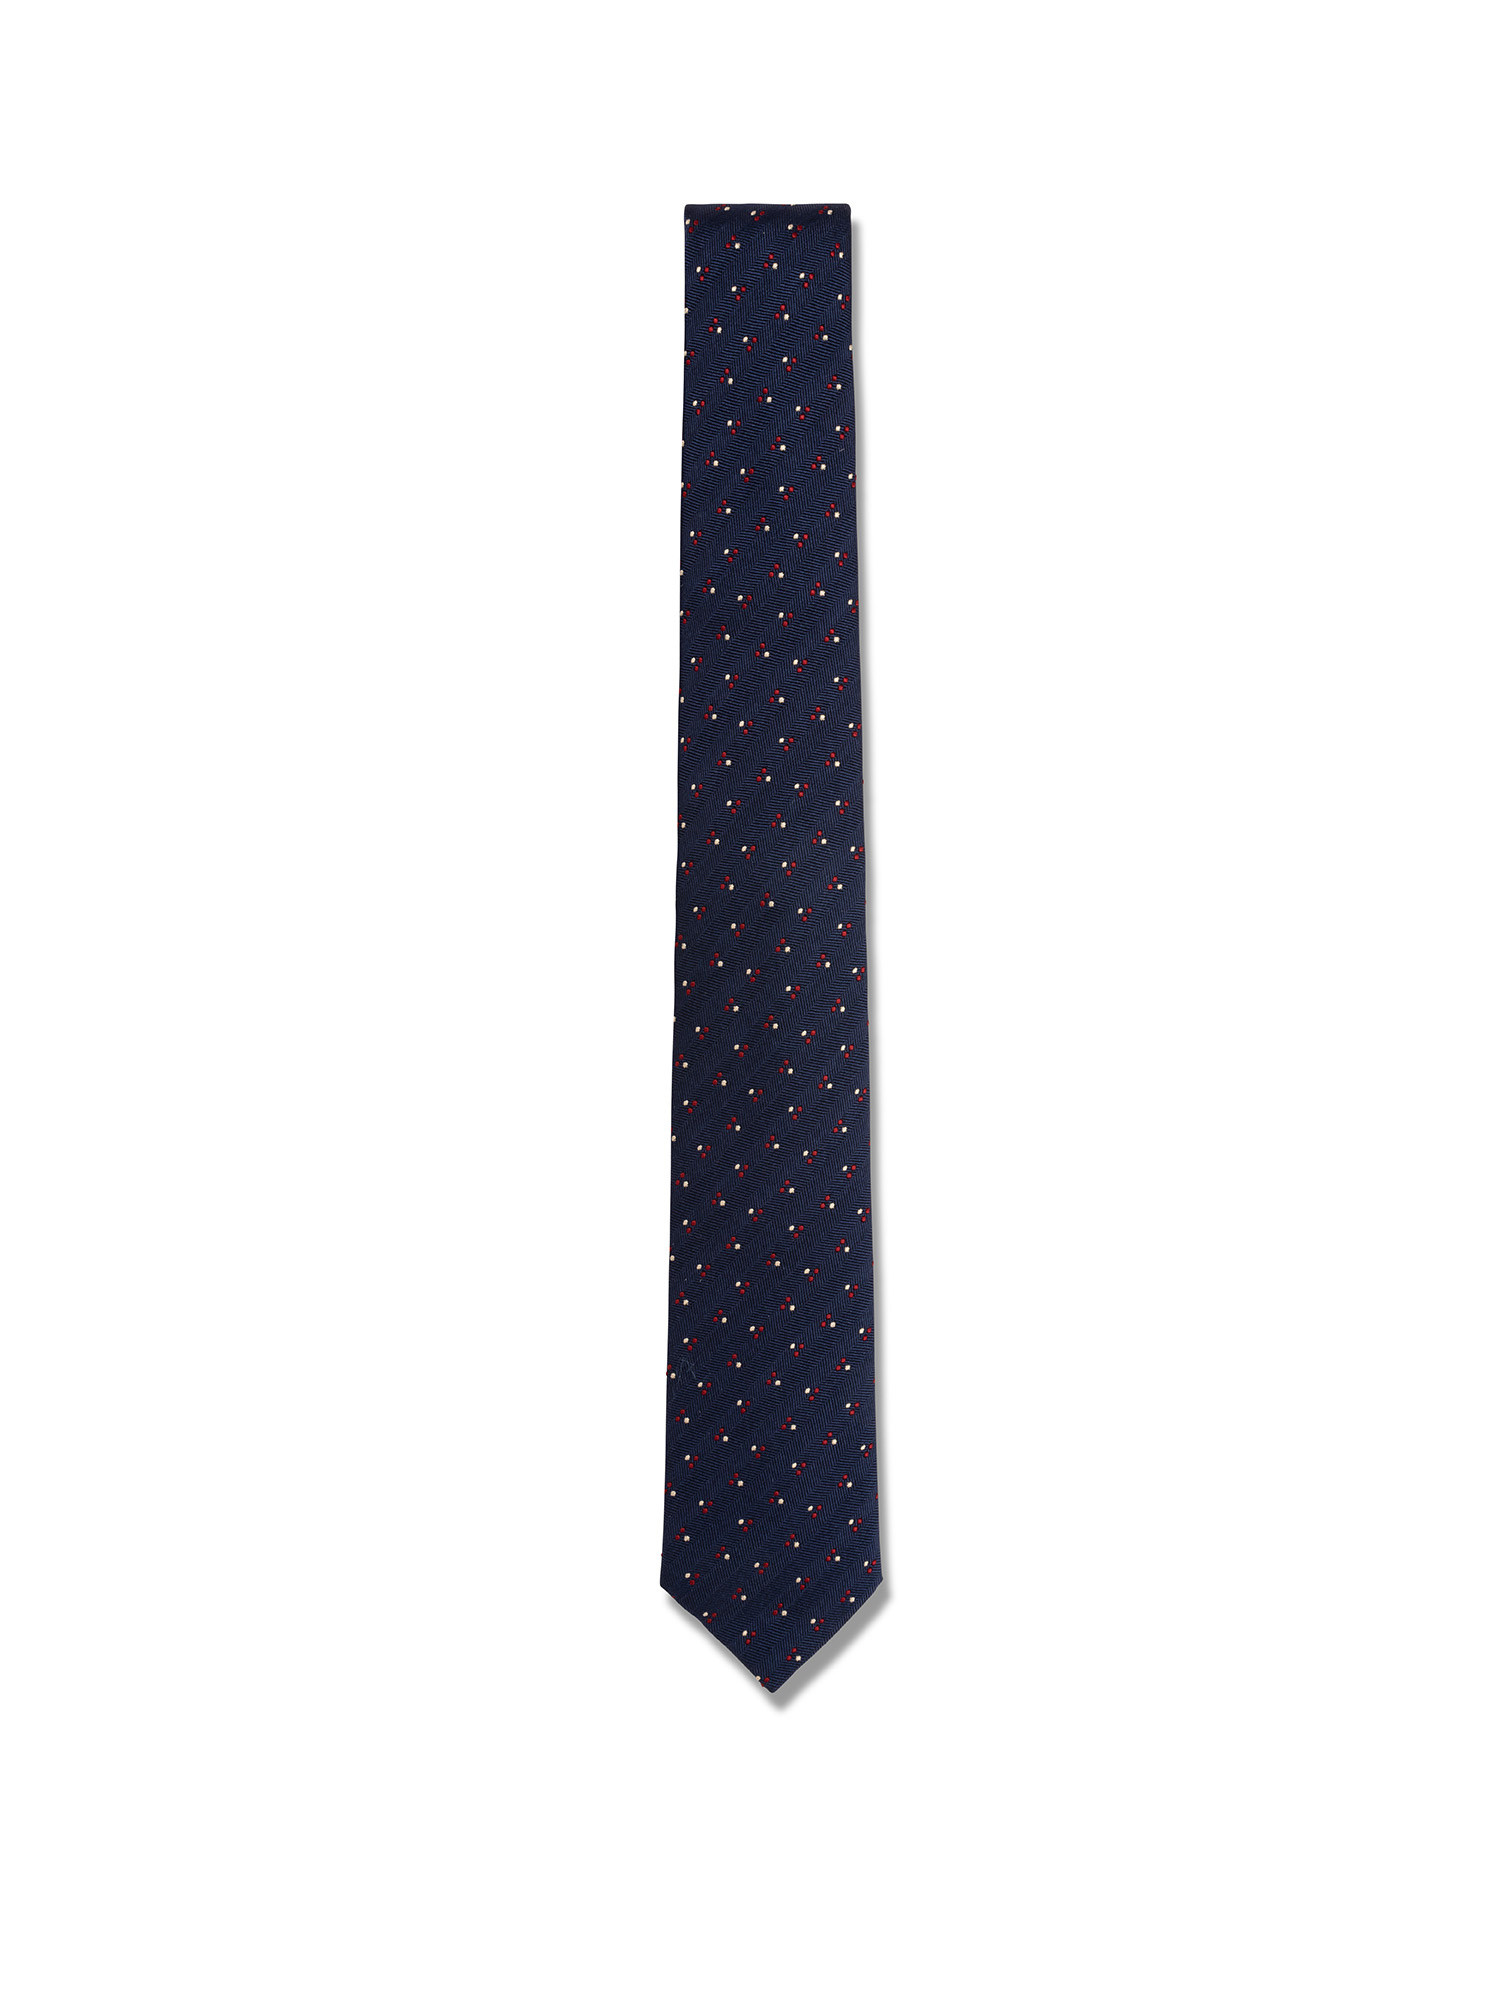 Luca D'Altieri - Patterned silk and cotton tie, Blue, large image number 1